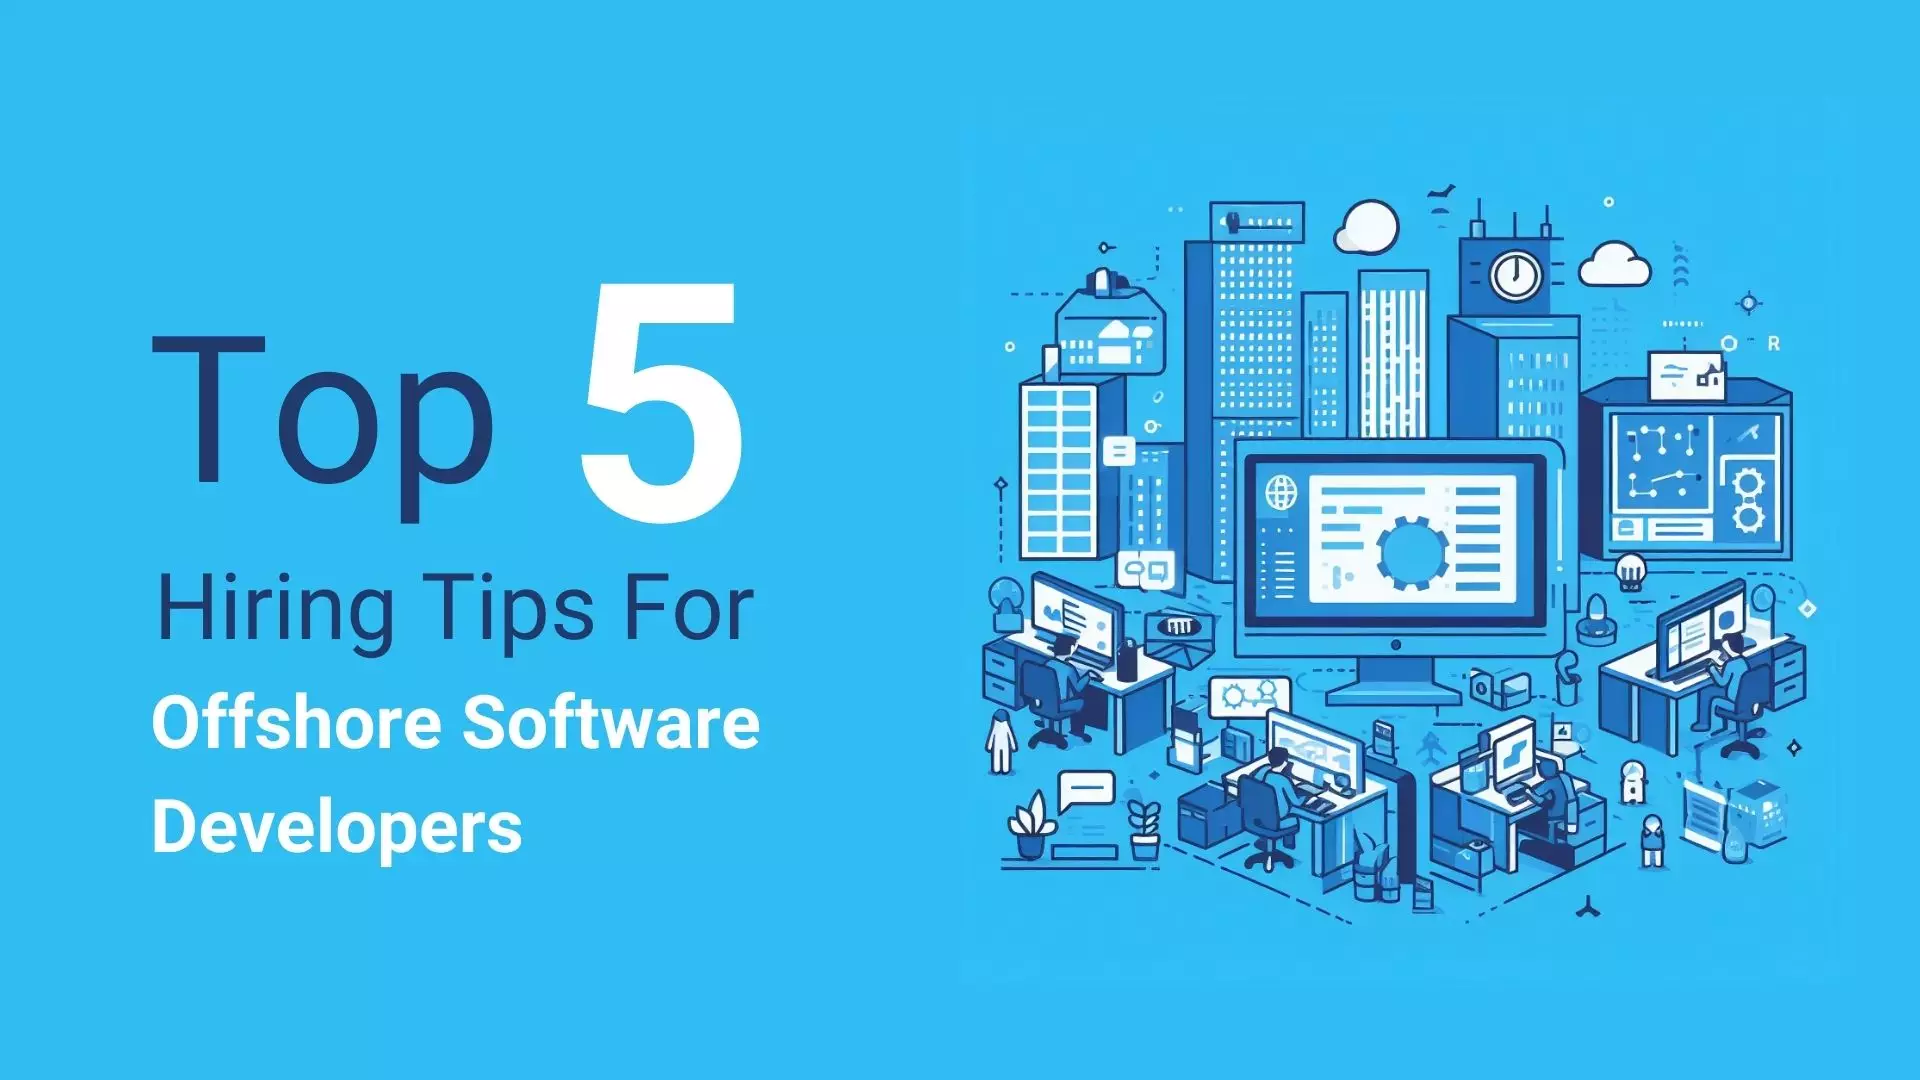 Top 5 Hiring Tips For Offshore Software Developers